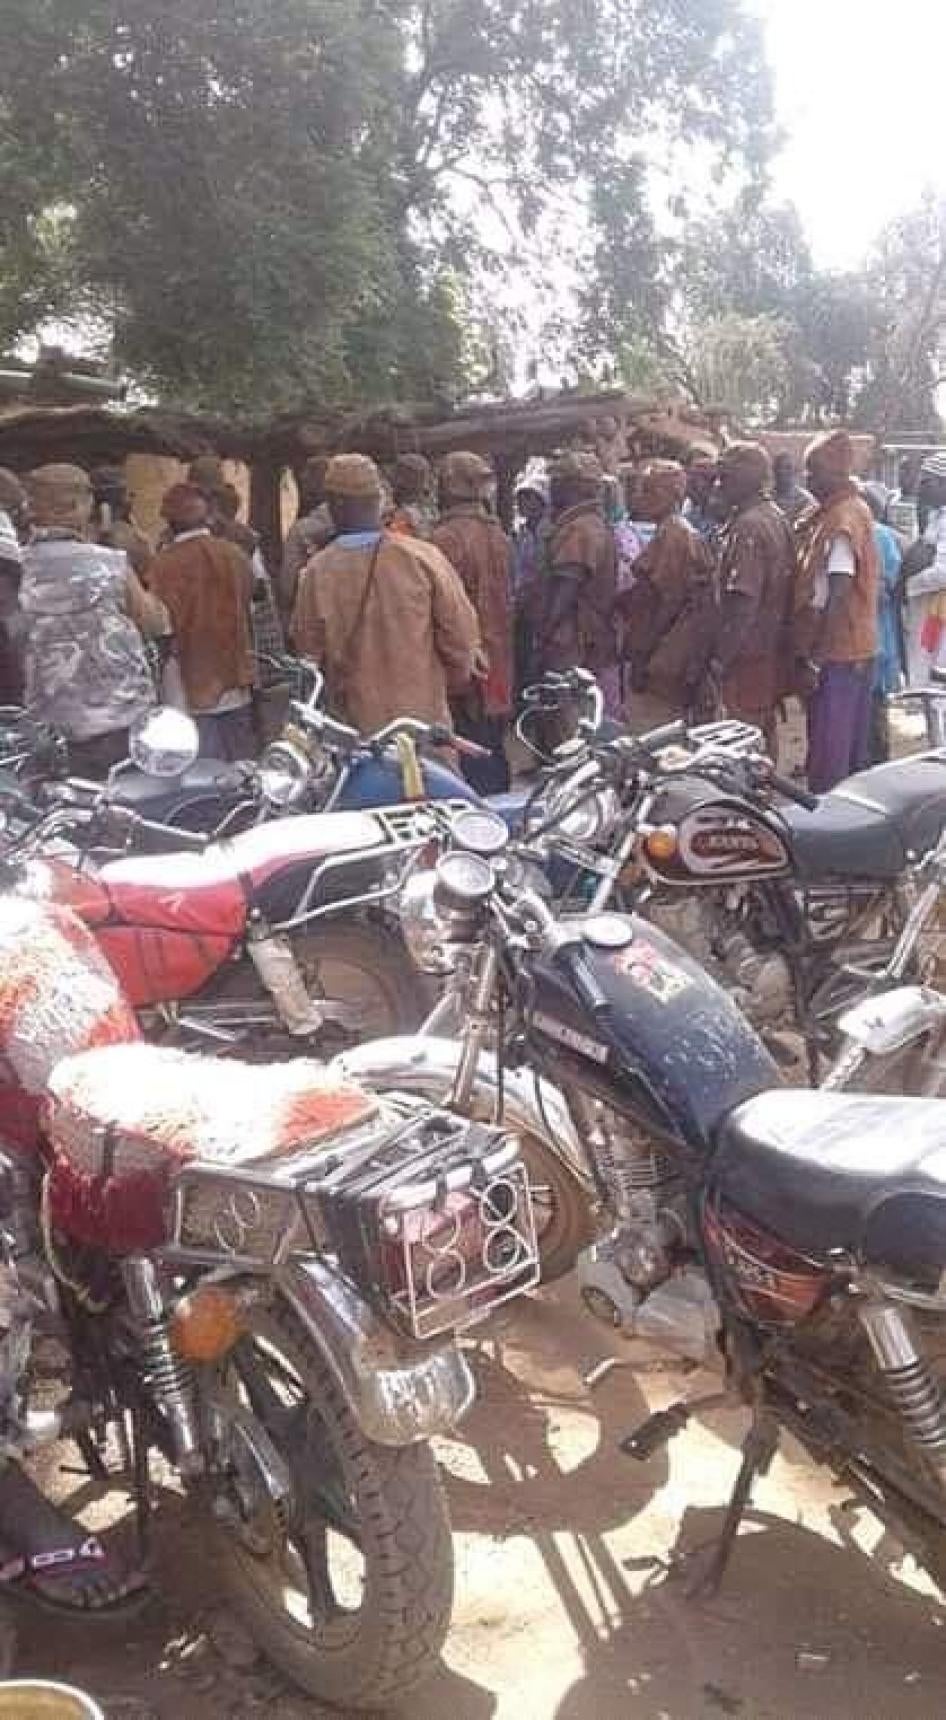 Dan Na Ambassagou militia gather for a meeting reportedly held in Koro cercle, Mopti region, central Mali, in November 2018. The Malian government imposed a ban on motorcycles in Mopti region for security reasons, although they have not always applied the